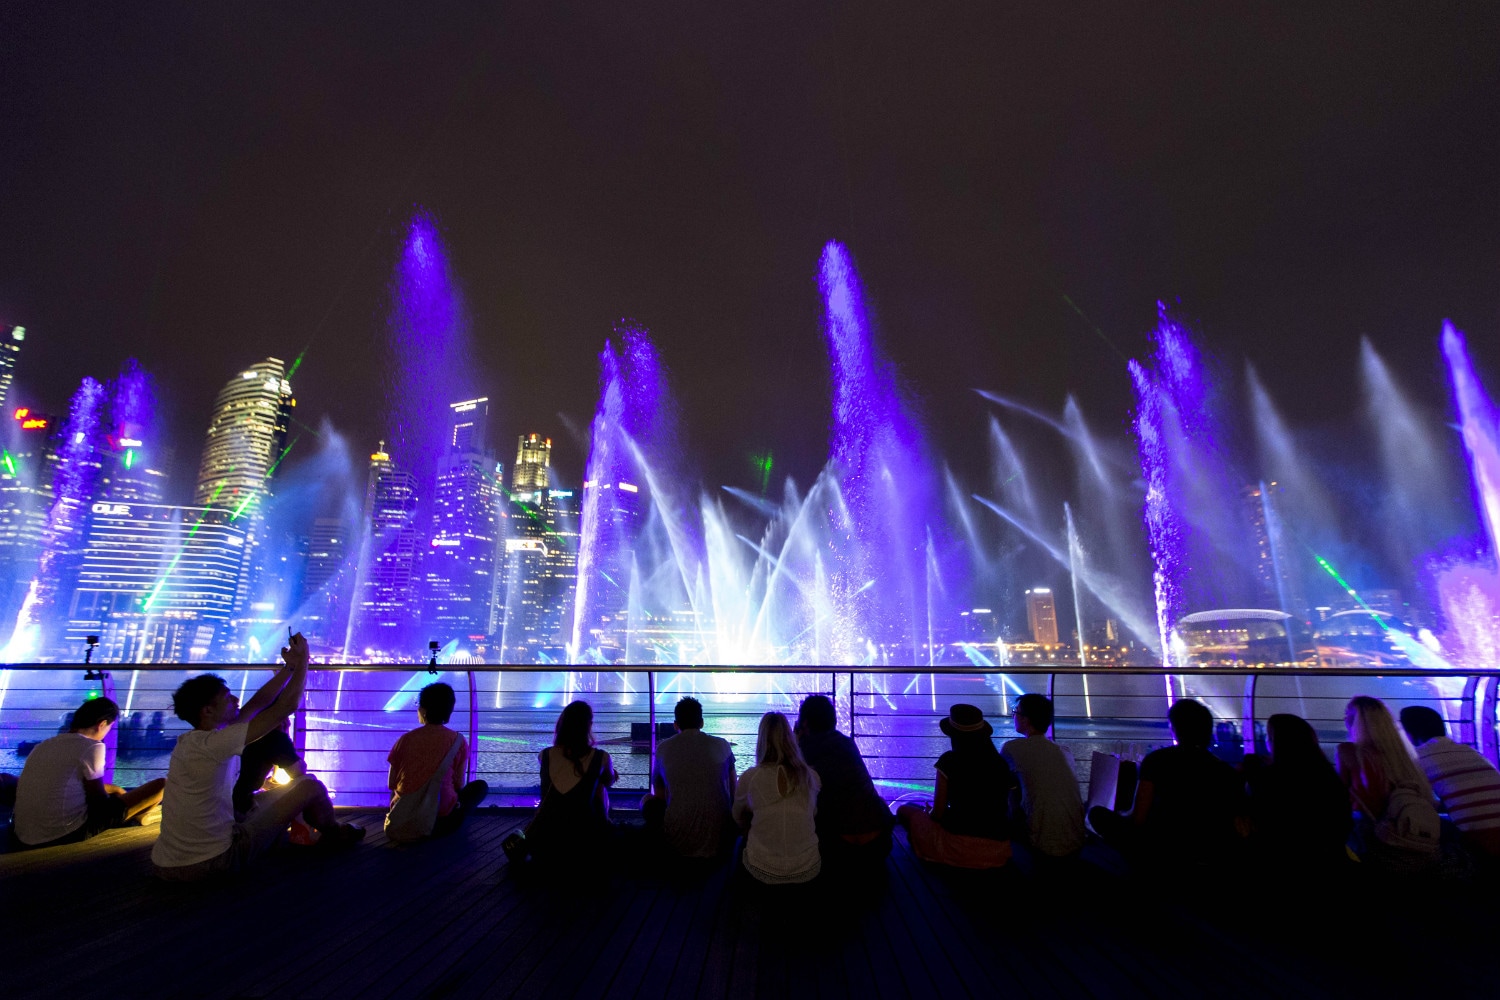 Spectra – A and Water Show